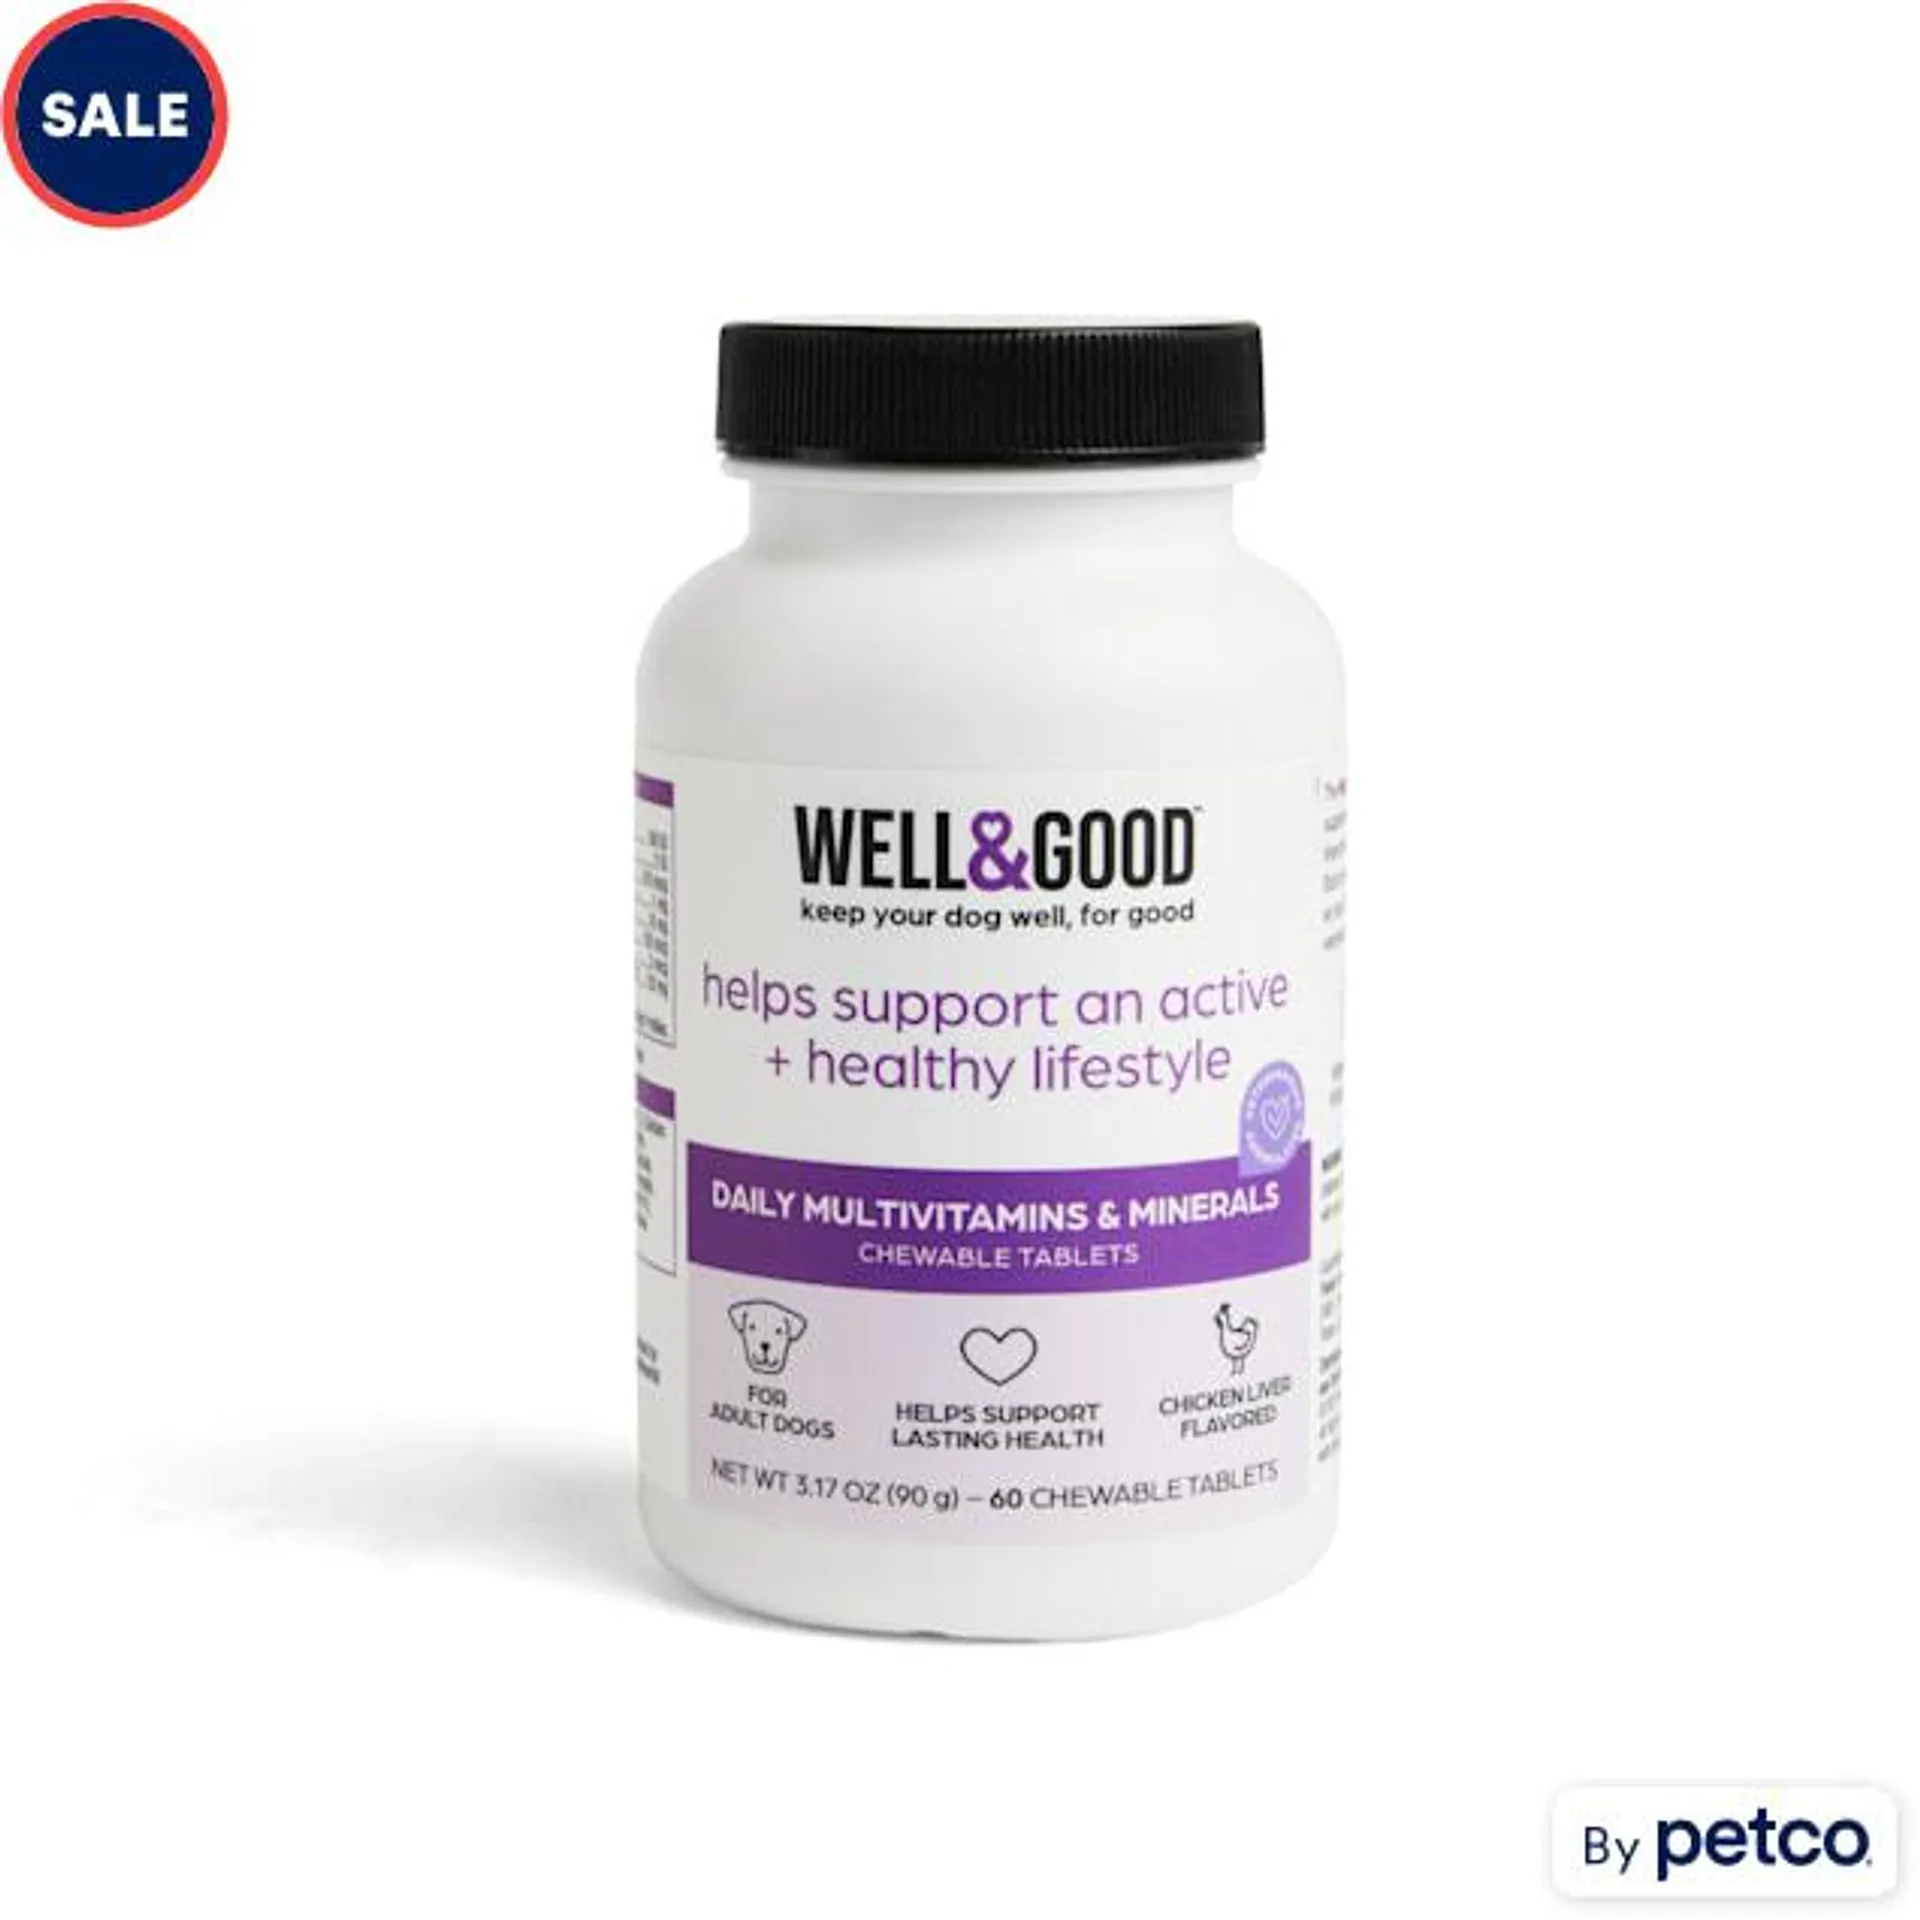 Well & Good Dog Multivitamins Chewable Tablets, Count of 60